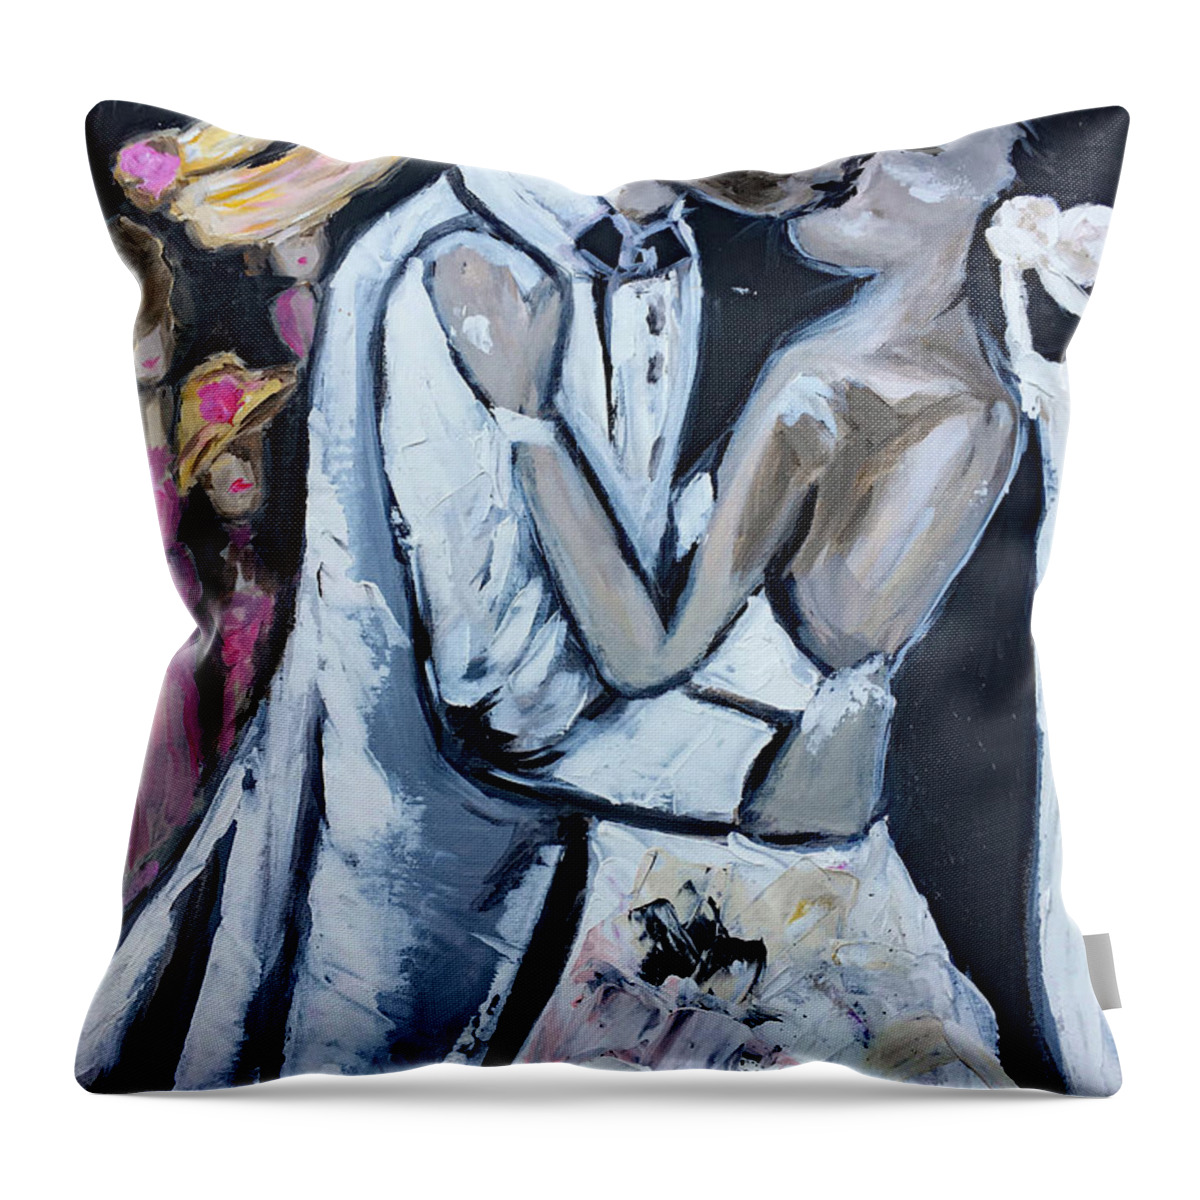 Wedding Throw Pillow featuring the painting At Last by Roxy Rich